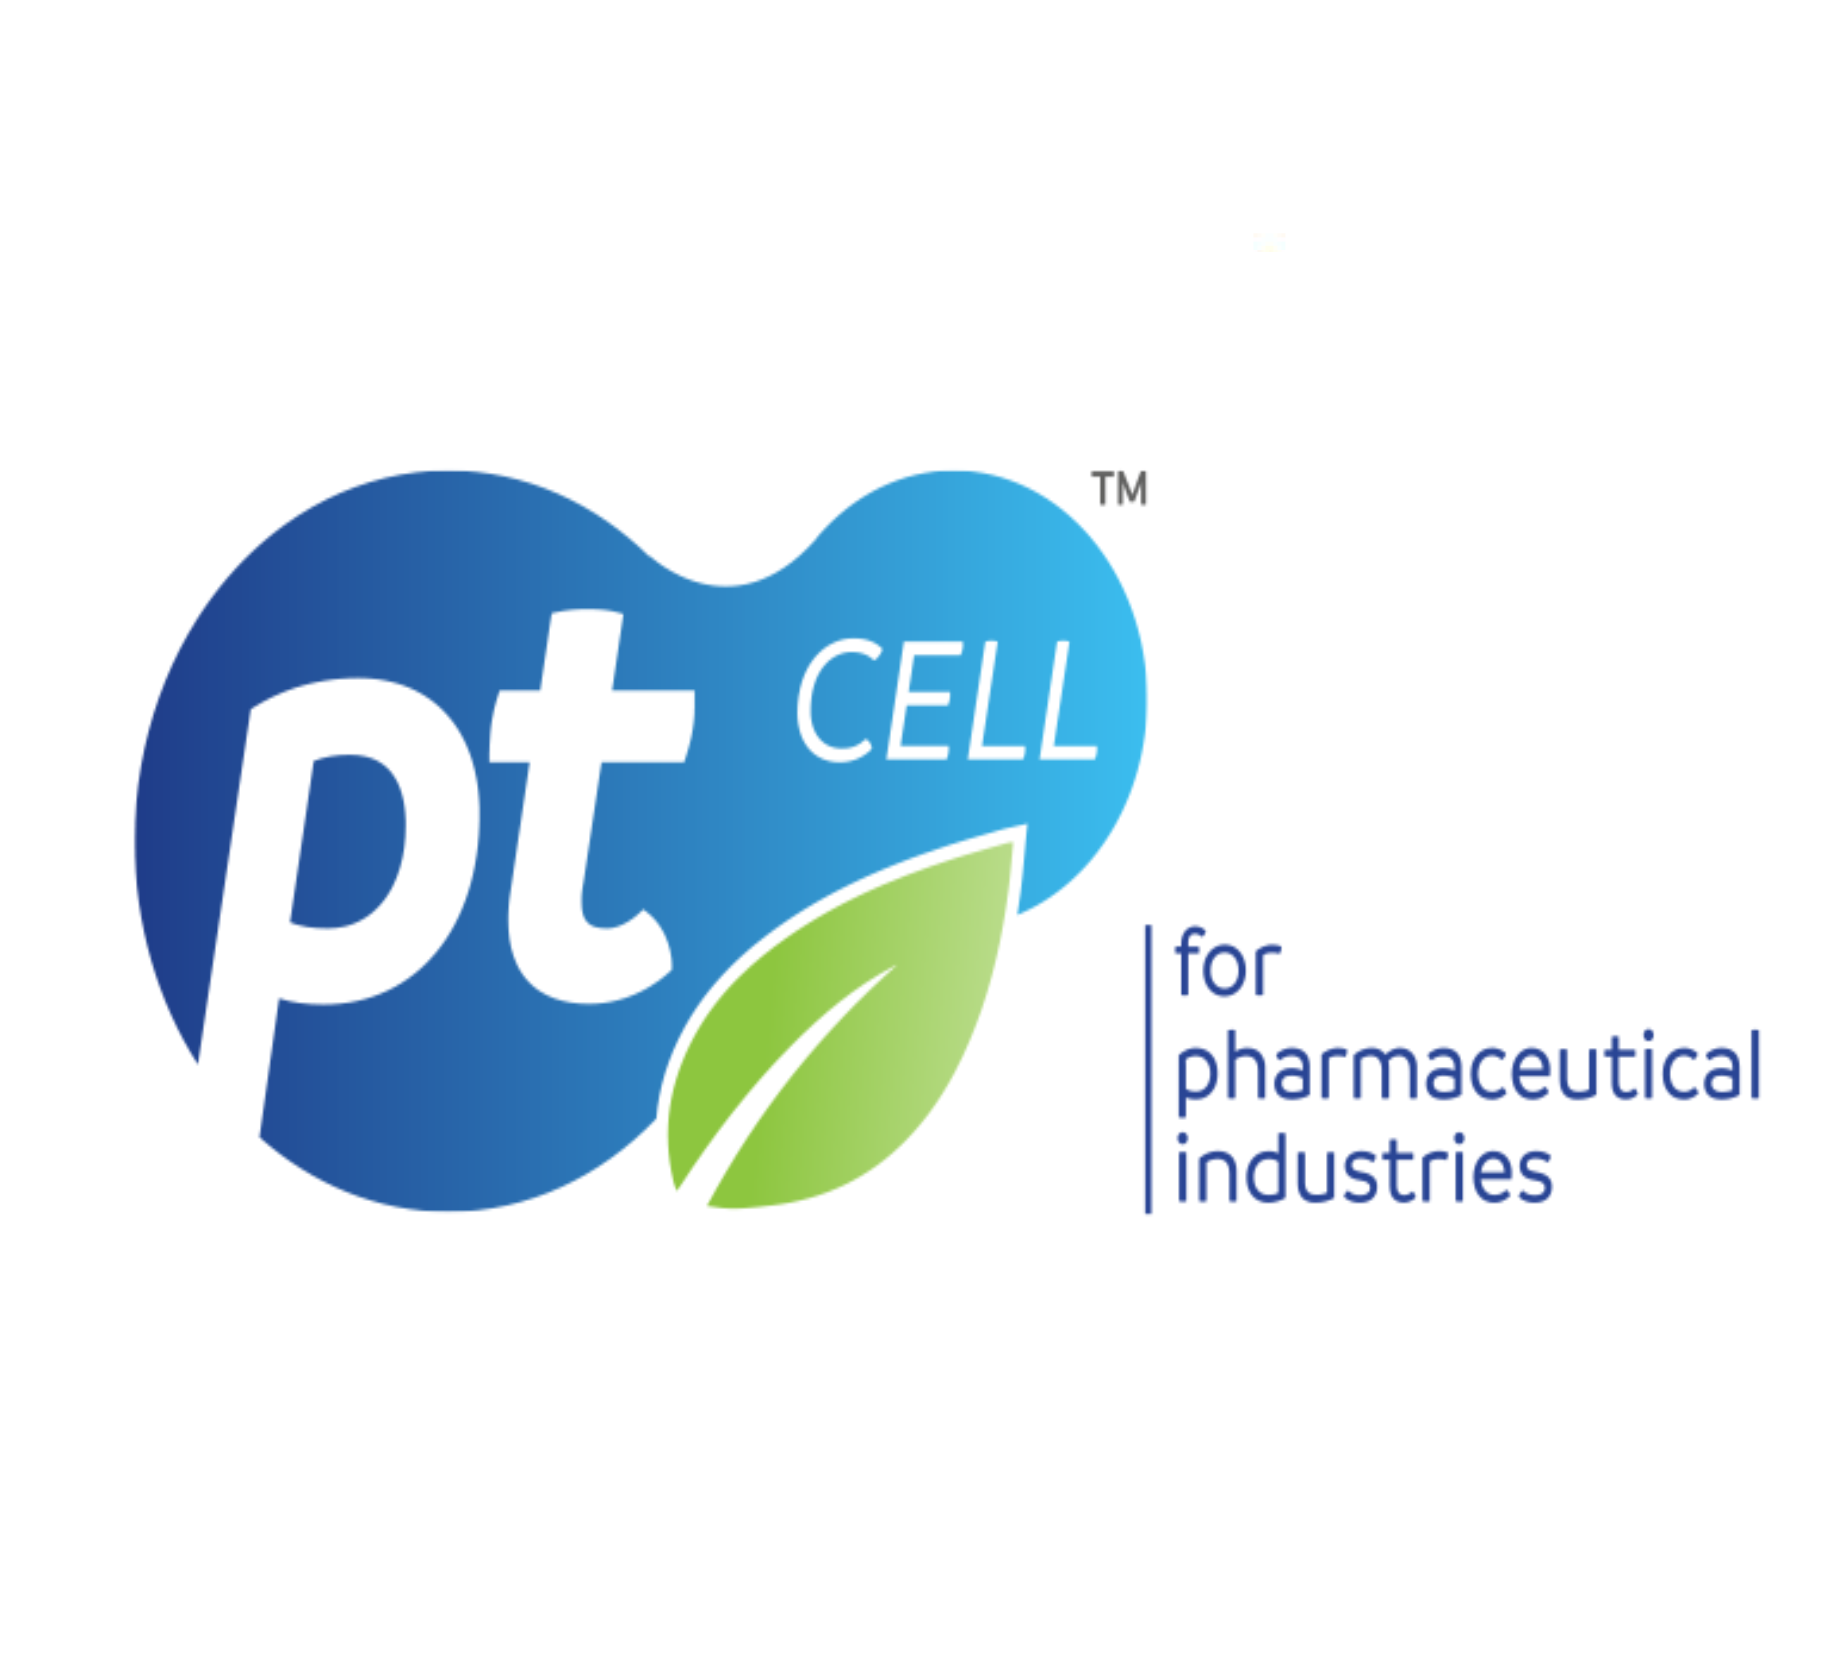 pt cell for pharmaceutical industries